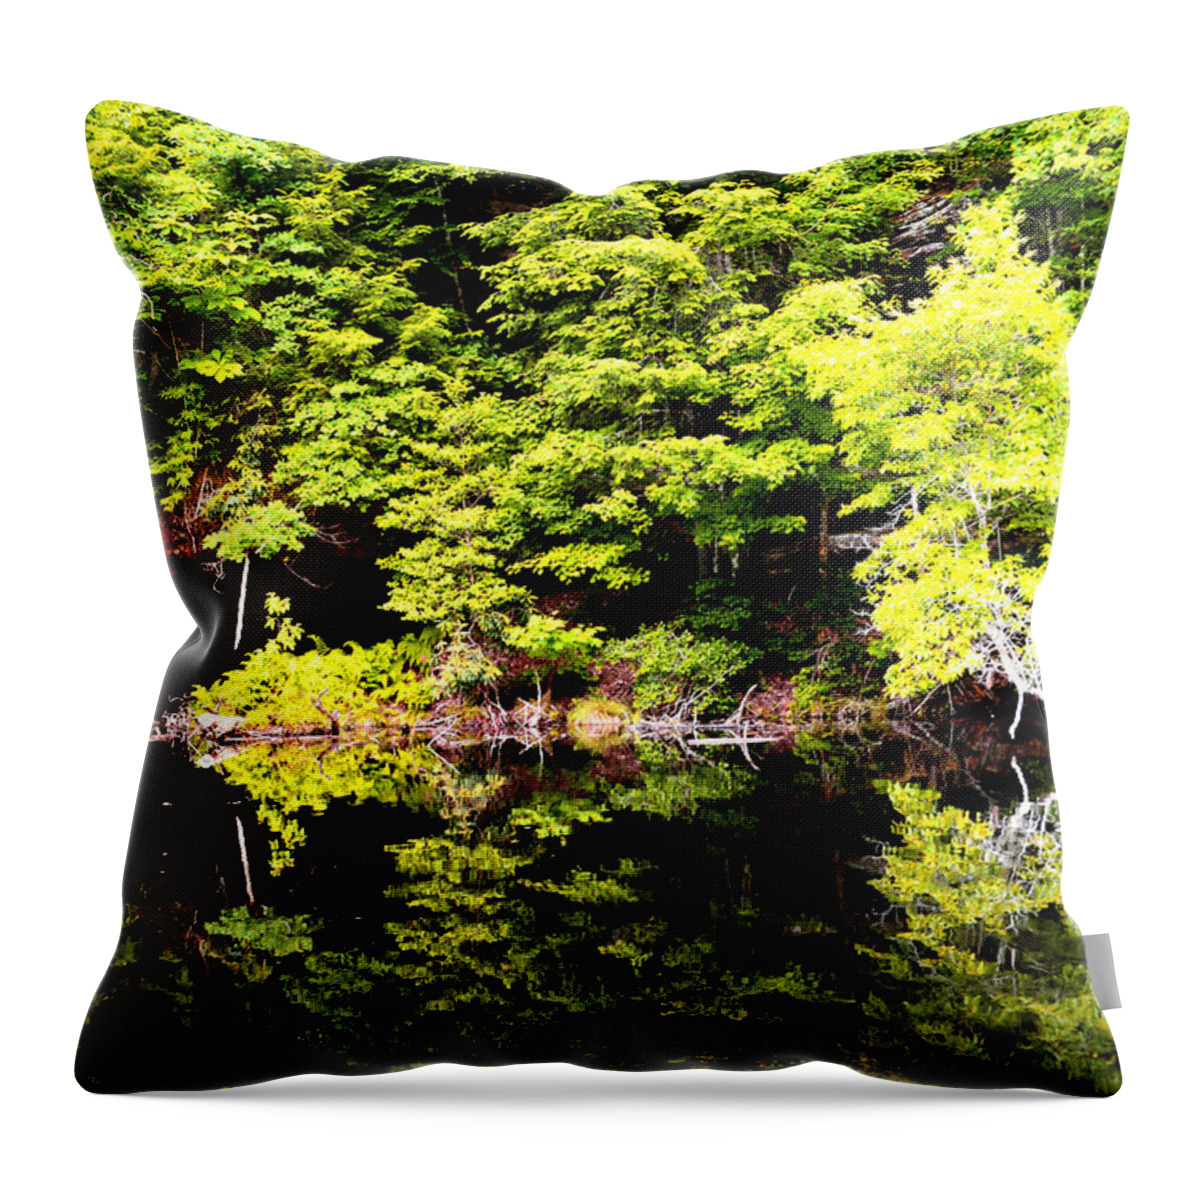  Water Reflection Throw Pillow featuring the photograph Surreal Springs Reflection by Stacie Siemsen